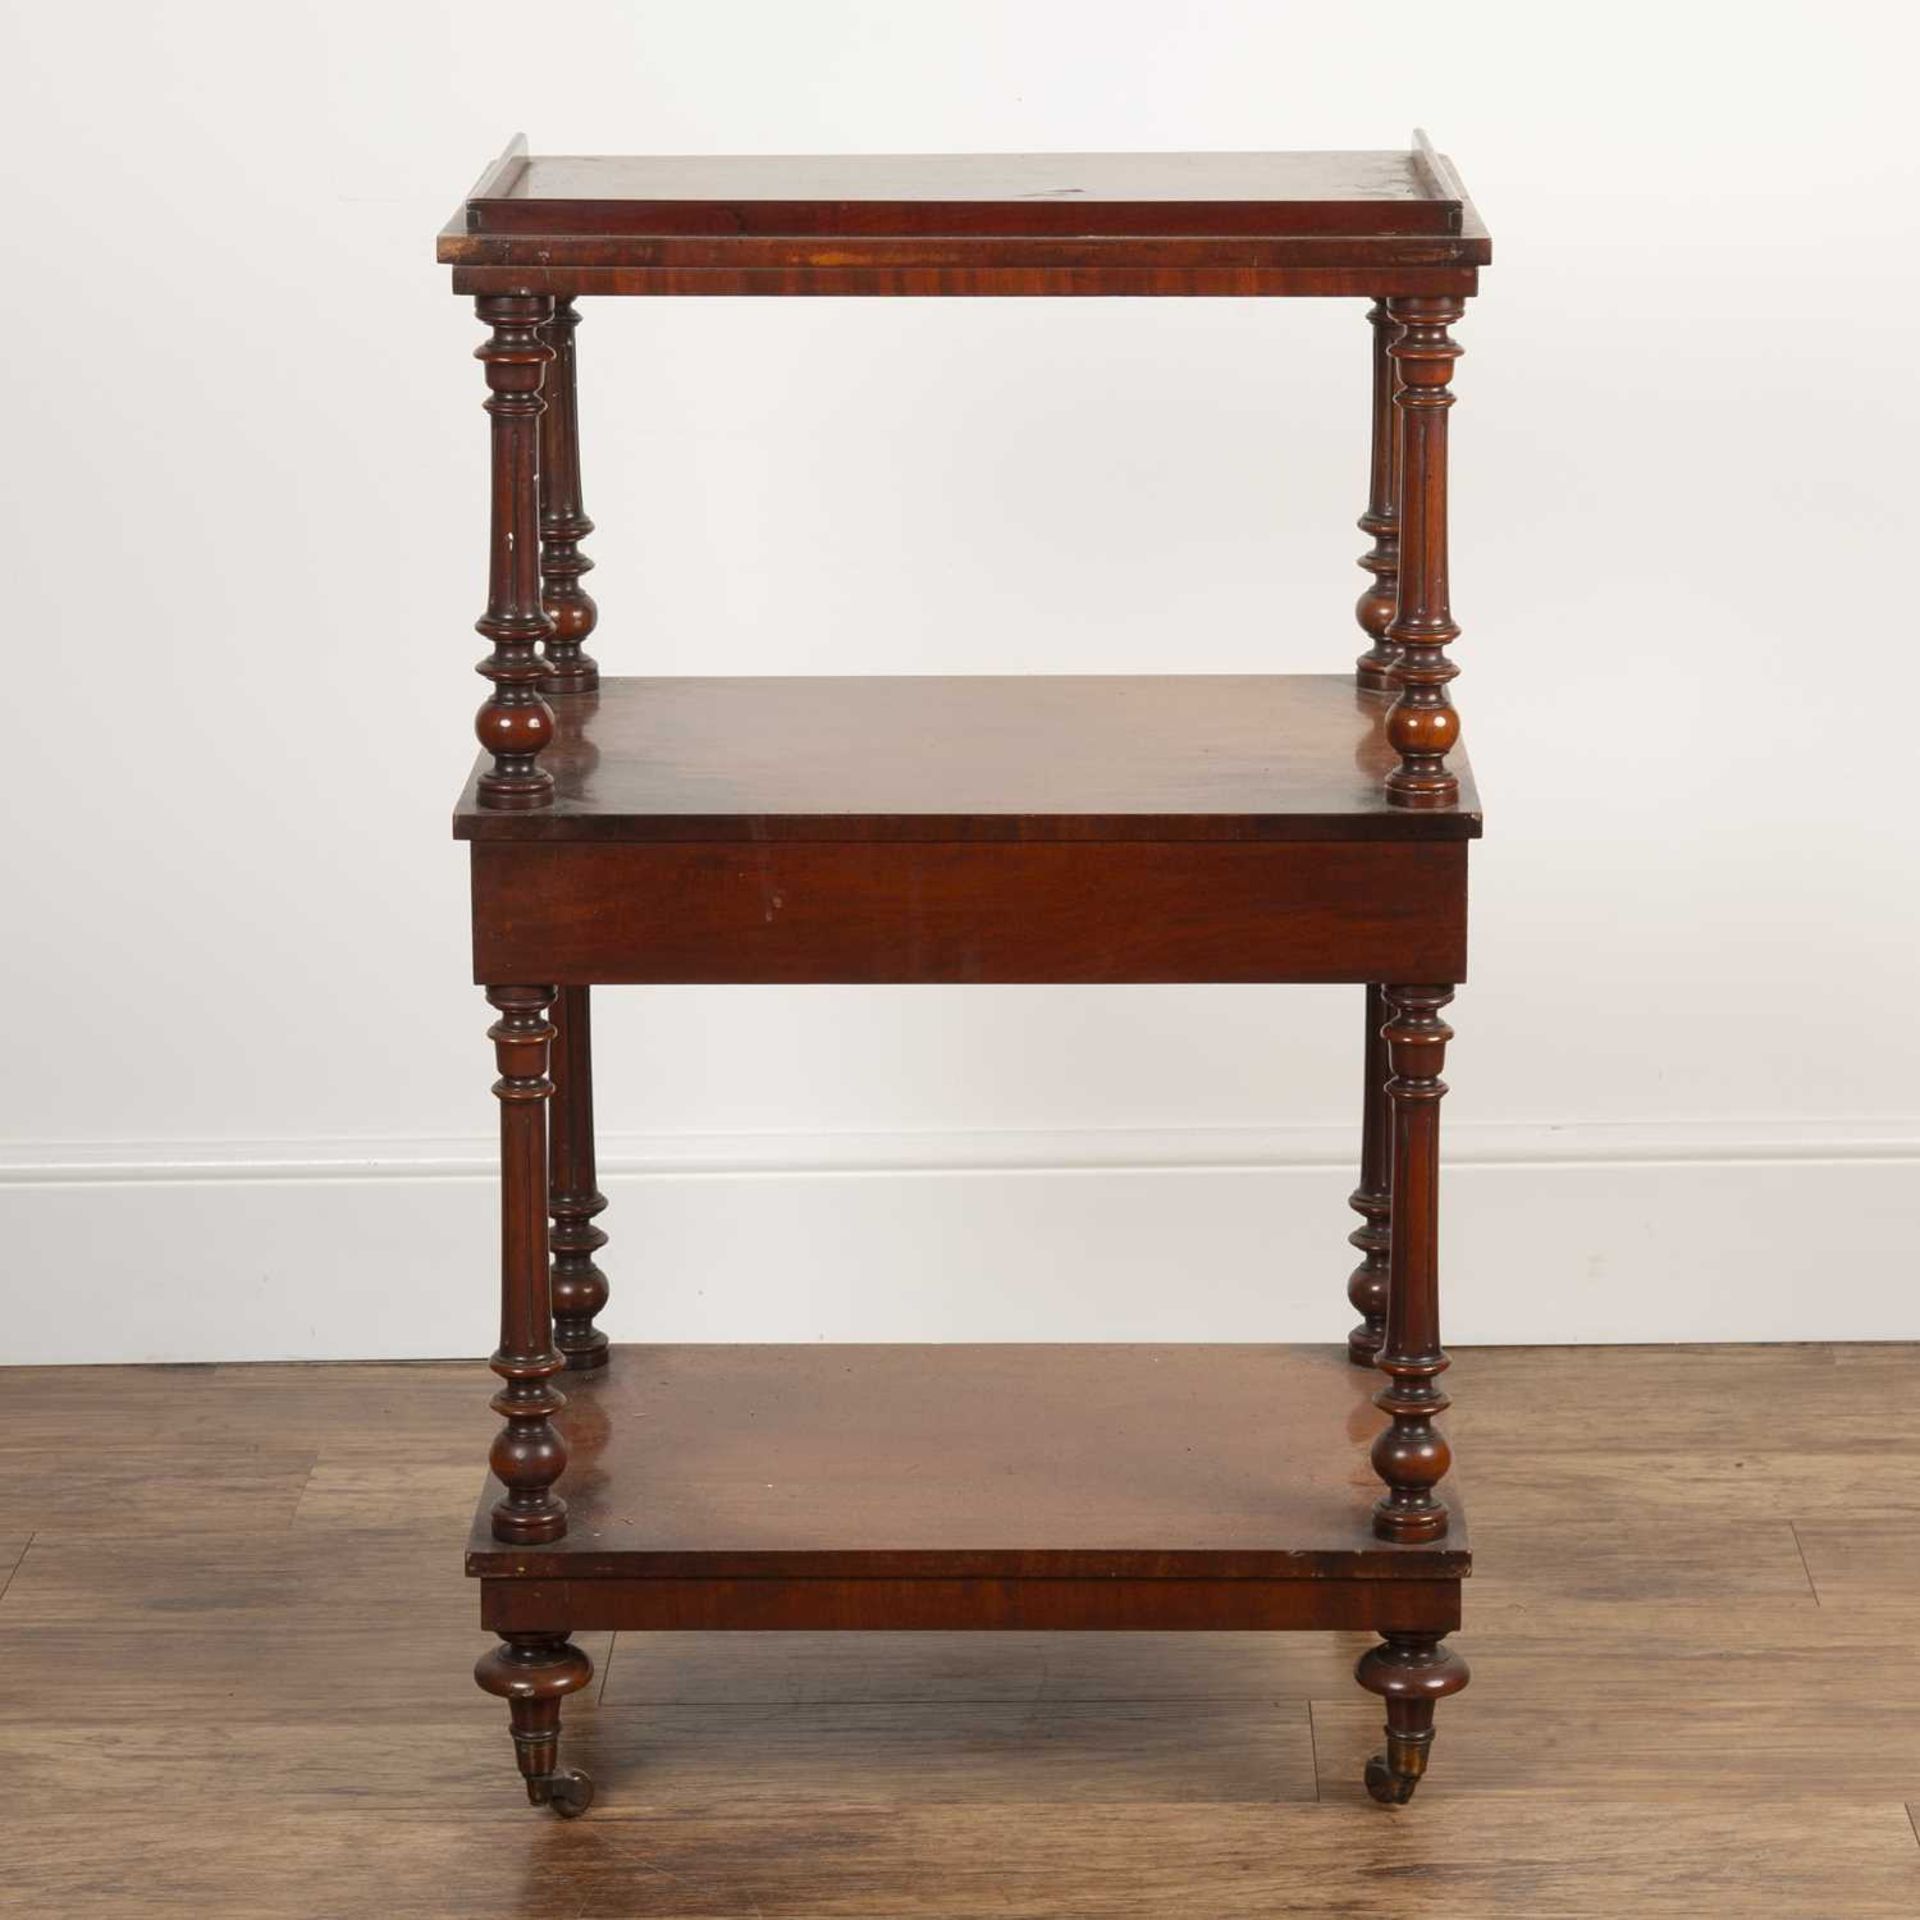 Mahogany three tier buffet stand 19th Century, with galleried top and single fitted drawer, standing - Image 5 of 6